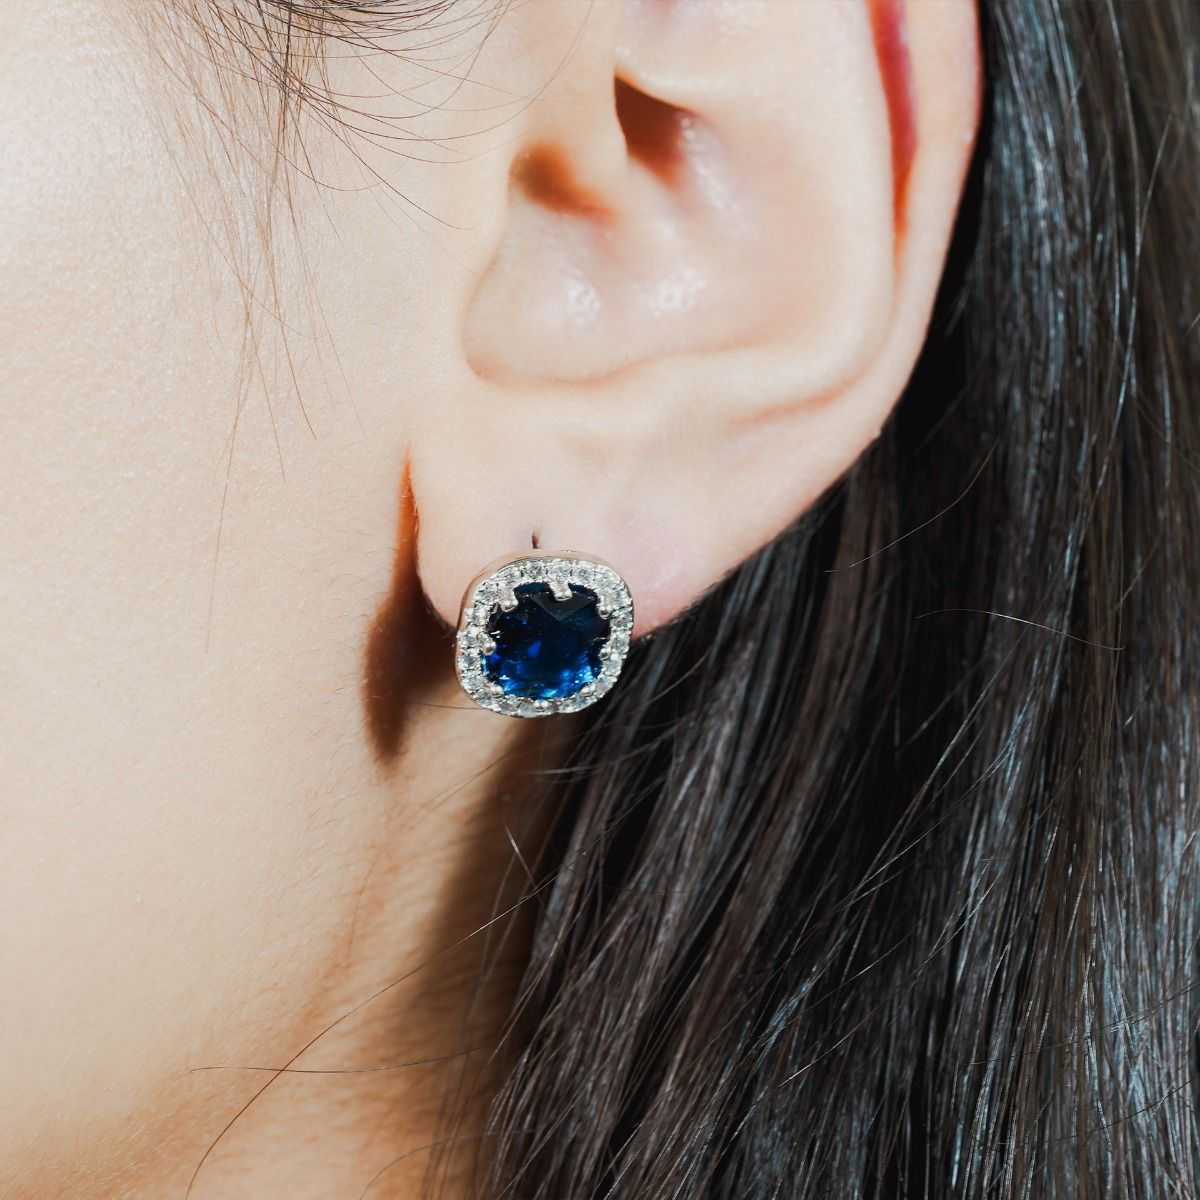 These striking stud drop earrings are set with flawlessly cut cubic zirconia stones, surrounding a dazzling Sapphire coloured cushion cut centre stone. Wear to add timeless glamour to any look.